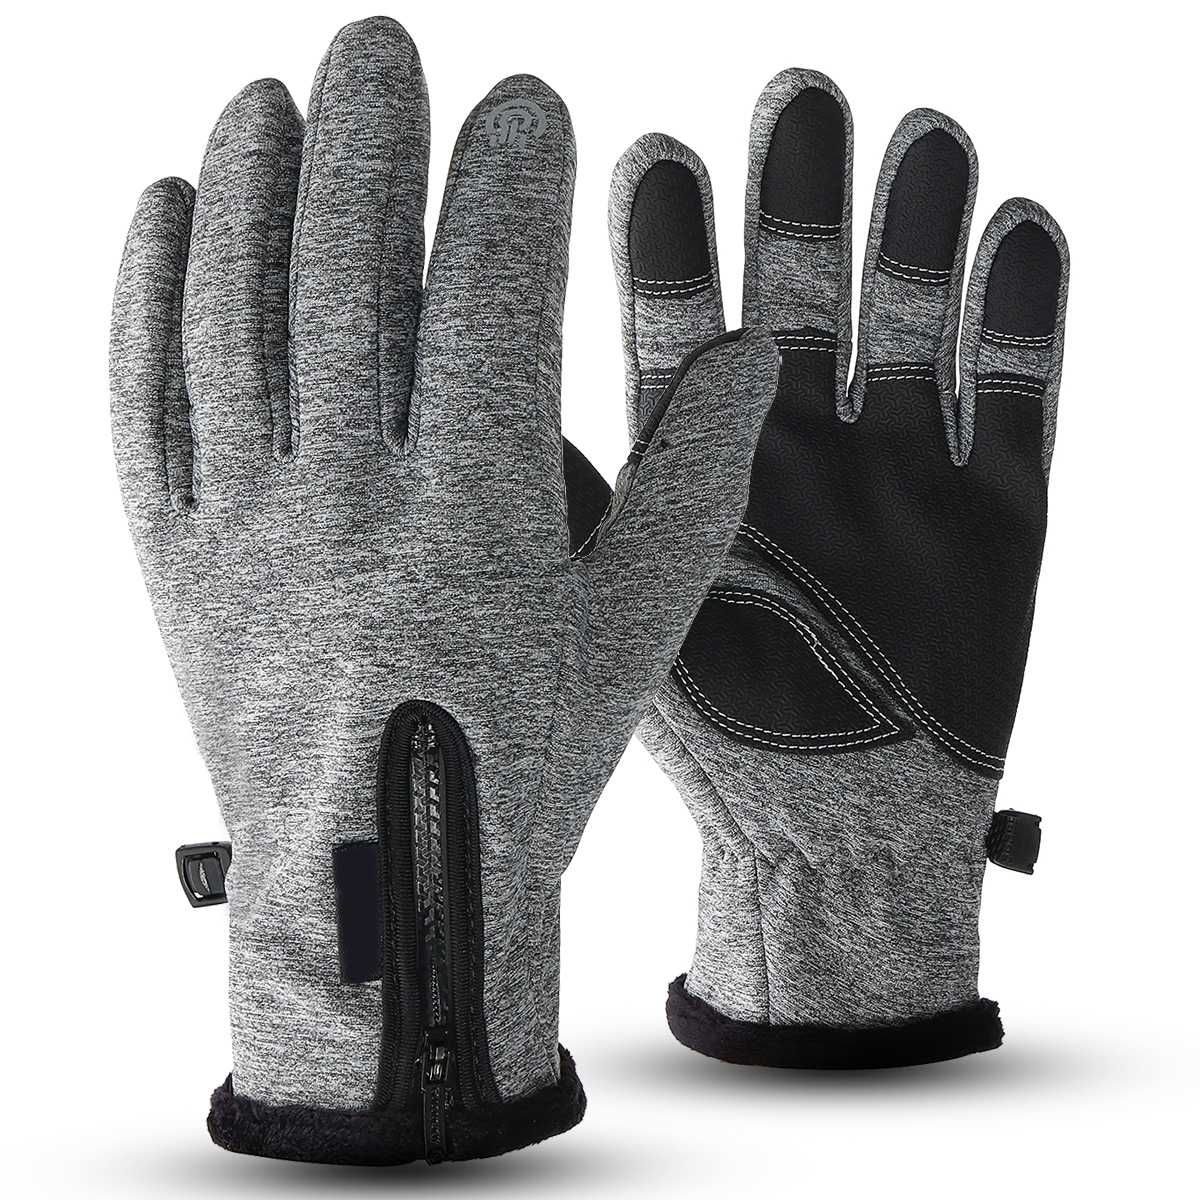 XL-Size-Winter-Warm-Waterproof-Windproof-Anti-Slip-Touch-Screen-Outdoors-Motorcycle-Riding-Gloves-1856137-2